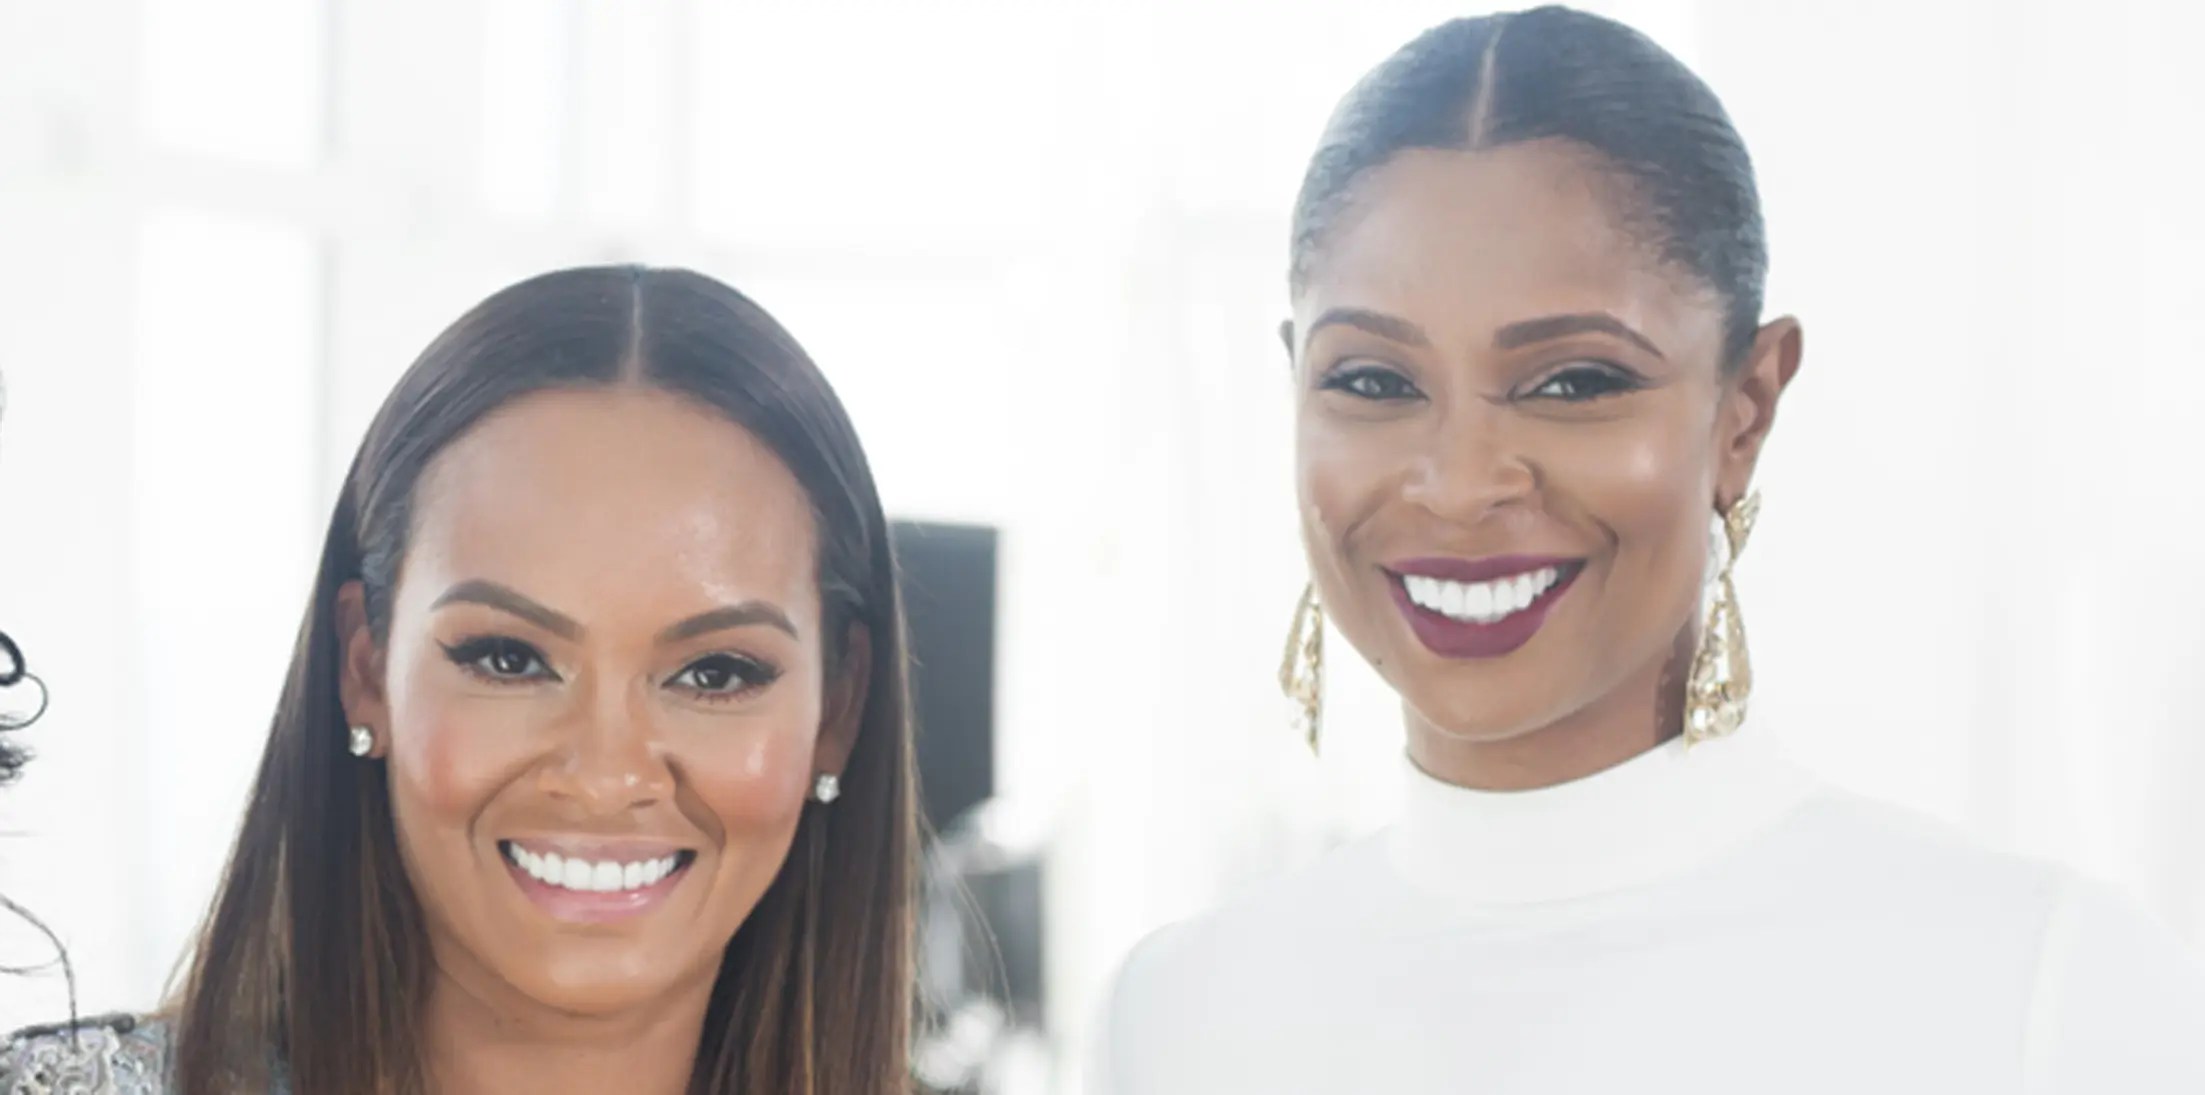 First Look At Jennifer Williams’ Return To ‘Basketball Wives’